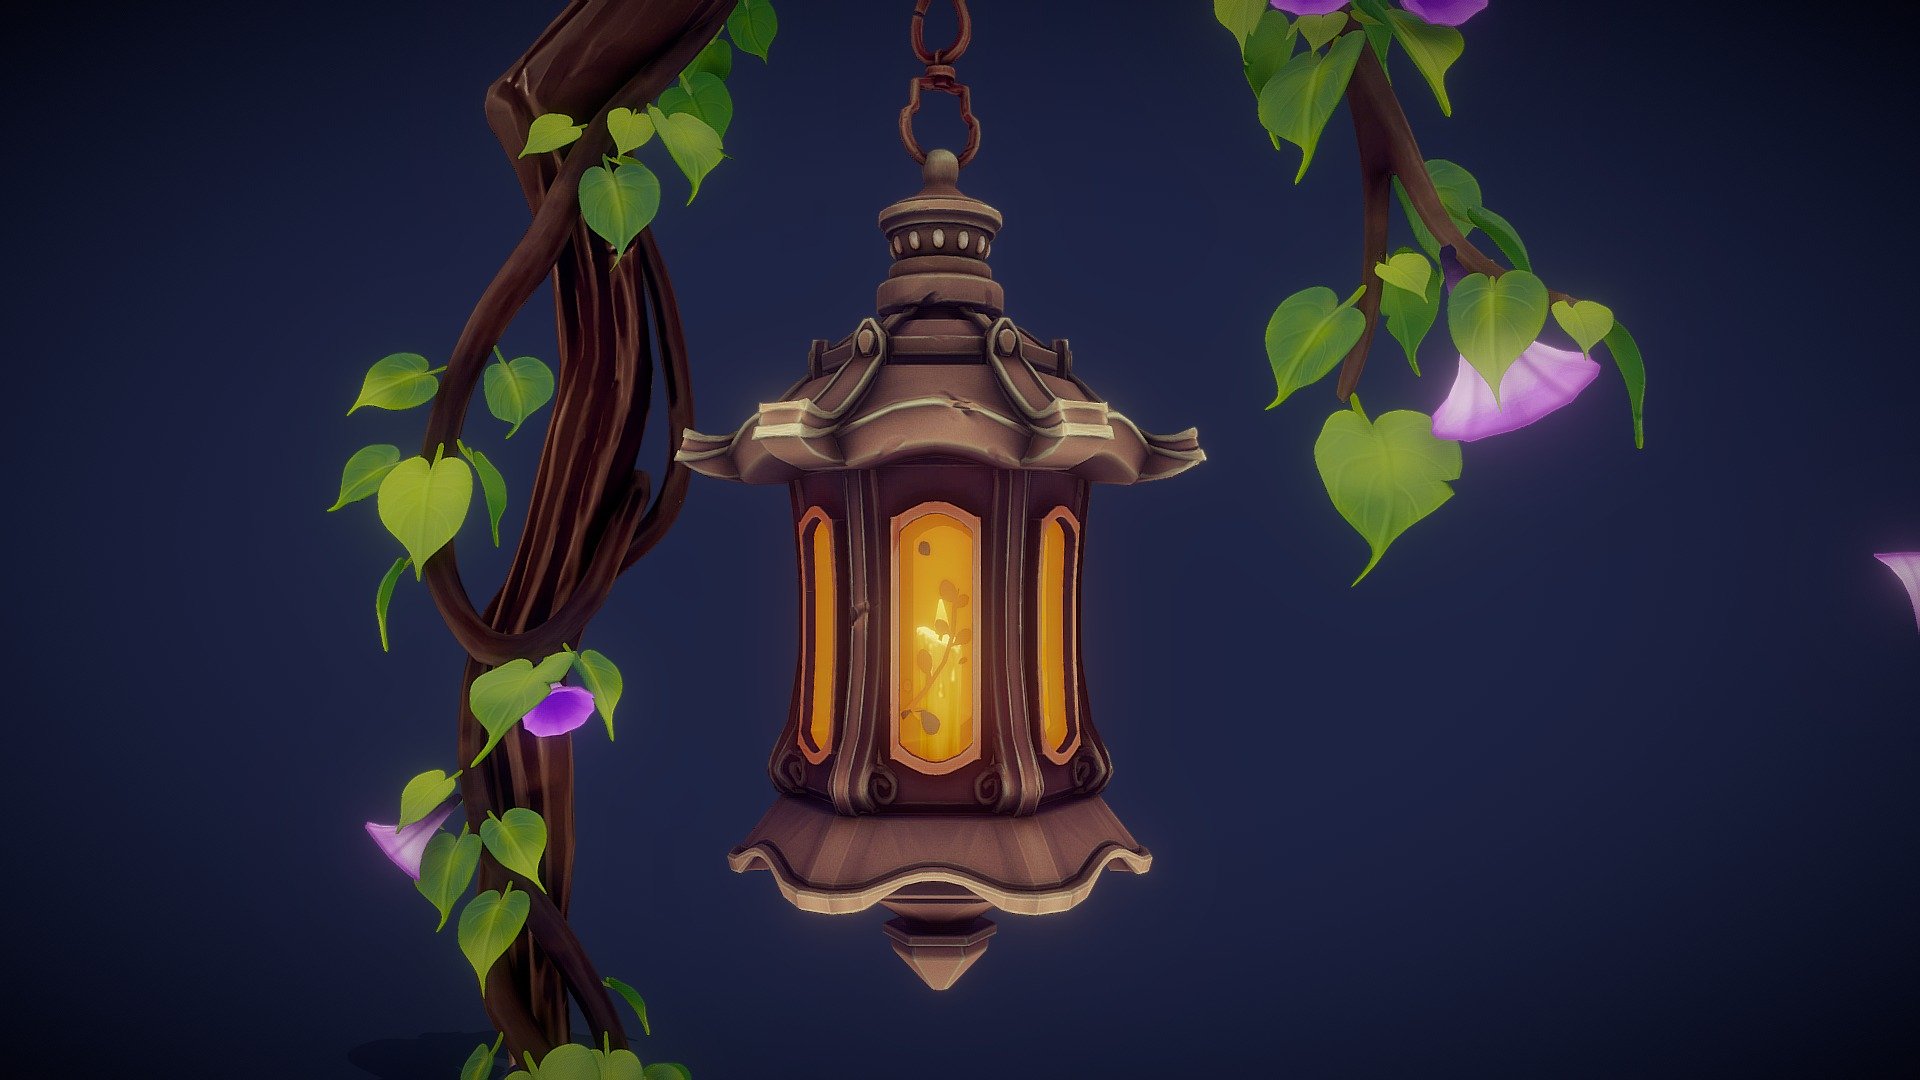 A stylized handpainted lamp practice.
Not really low-poly optimized because I only want to practice texturing 3d model